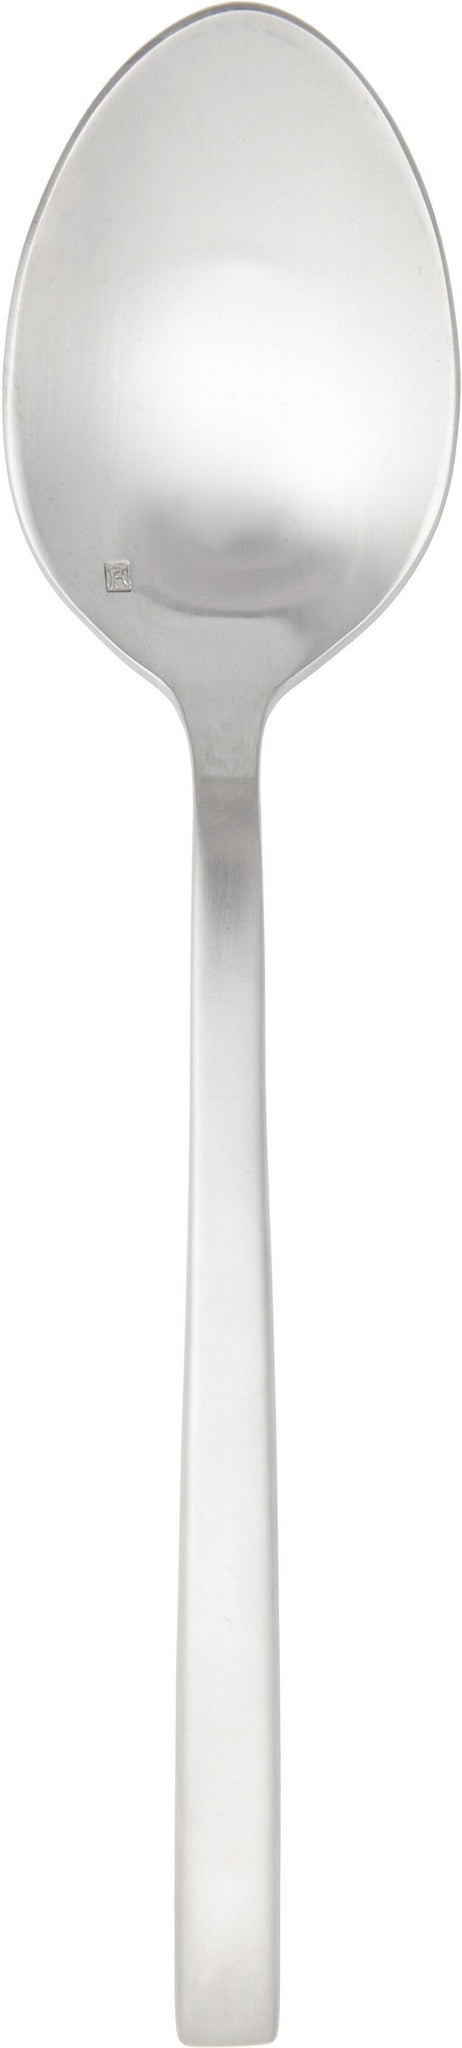 Fortessa - 9.3" Arezzo Stainless Steel Brushed Serving Spoon - 1.5B.165.00.027